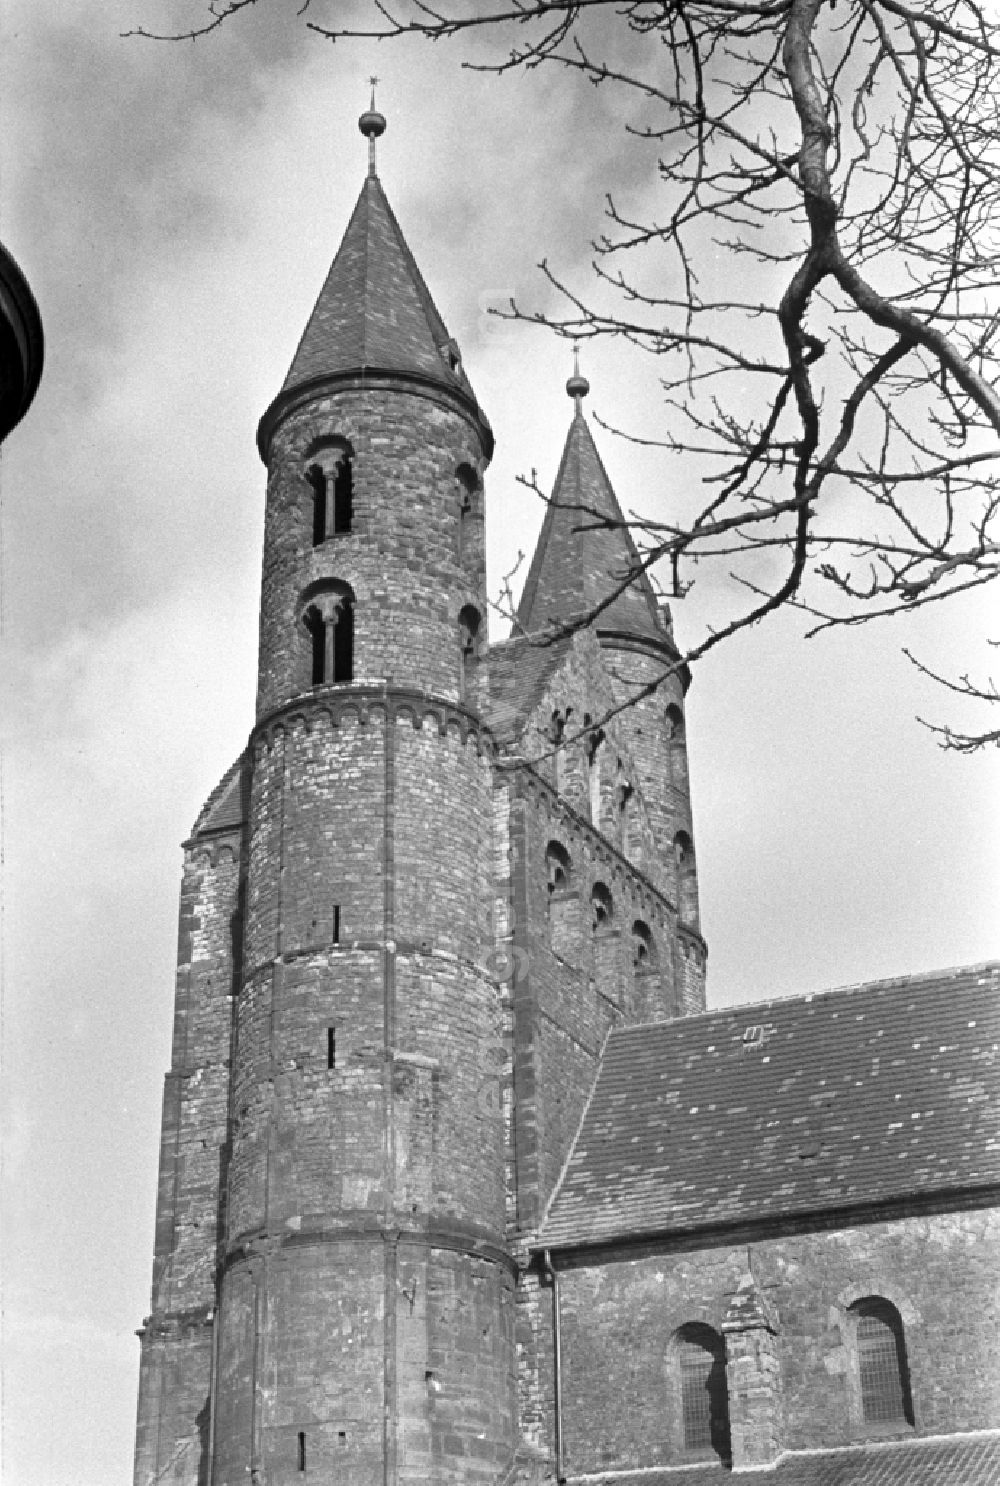 GDR picture archive: Magdeburg - The Monastery of Our Lady is a monastery in the old town of Magdeburg. The ensemble is one of the most important Romanesque plants in Germany. Today the buildings are used as a municipal art museum and concert hall. The monastery is one of the most famous sights of the city